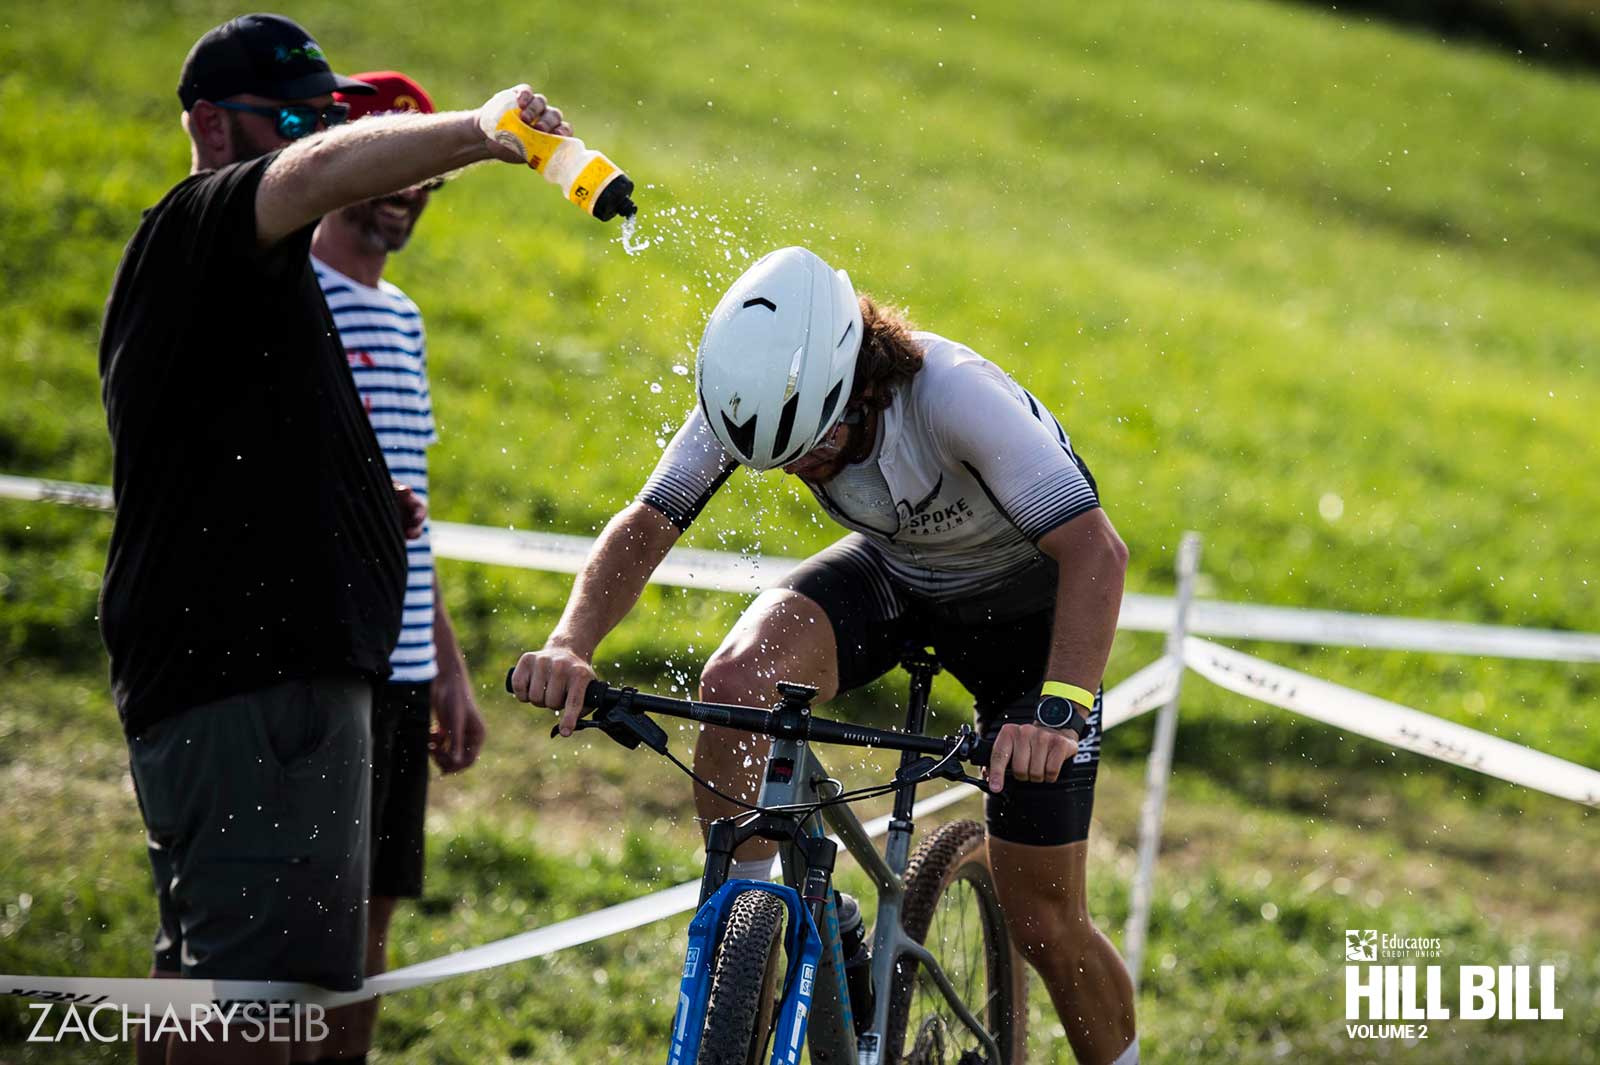 A man squirting a water bottle onto a hot cyclocross racer as they remount their bike.